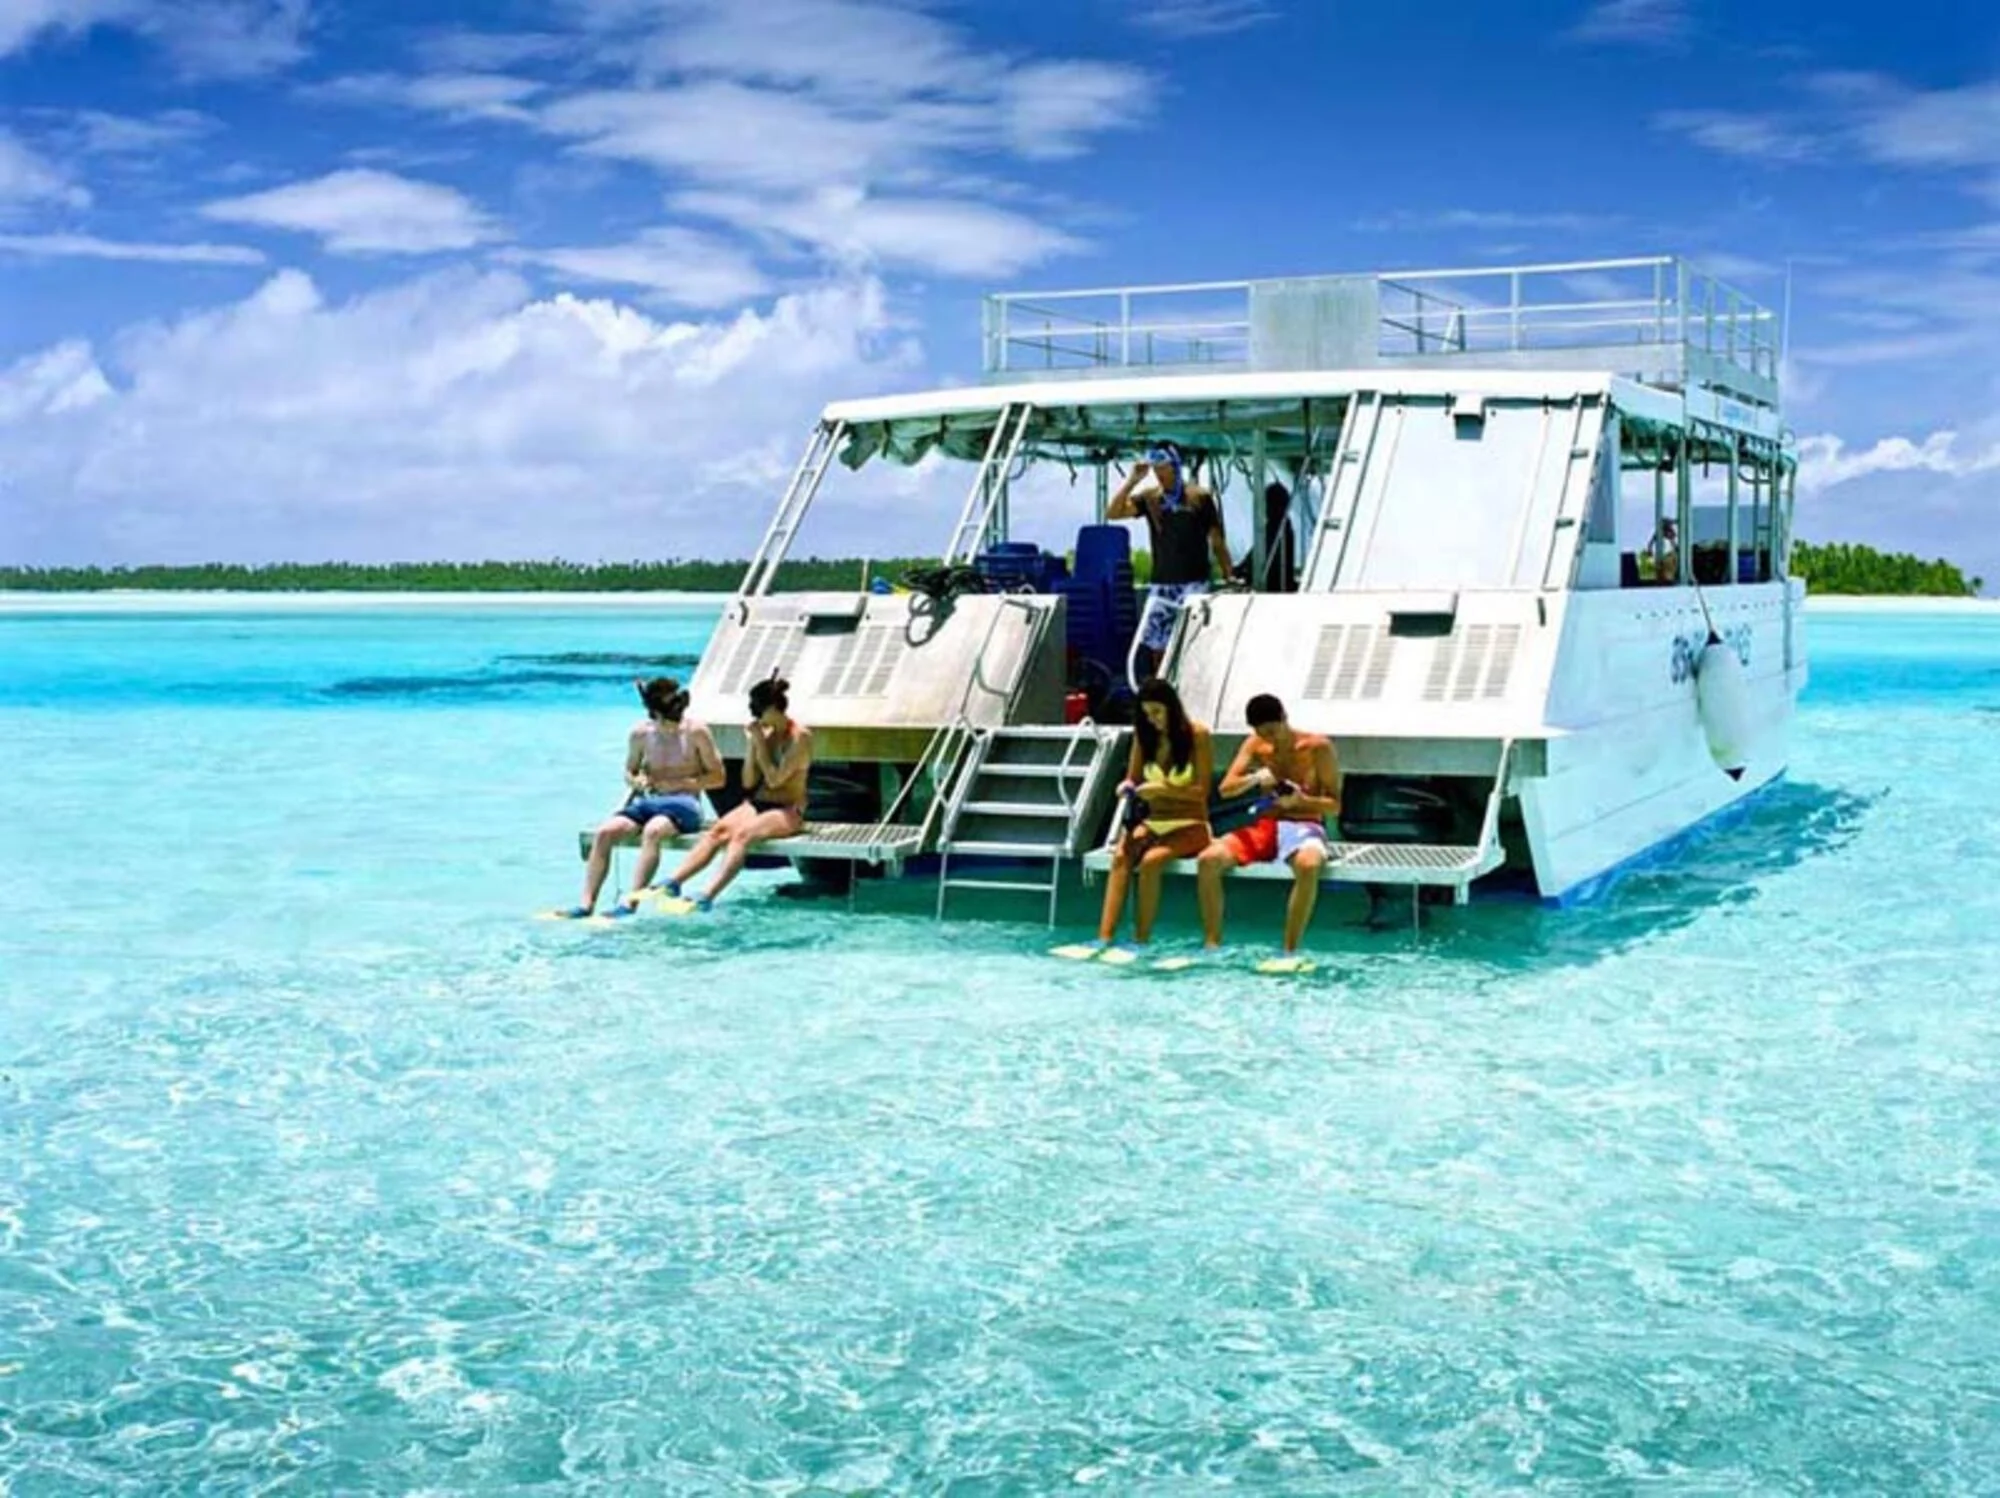 Bishop’s Cruises in Cook Islands, Australia and Oceania | Excursions - Rated 0.8